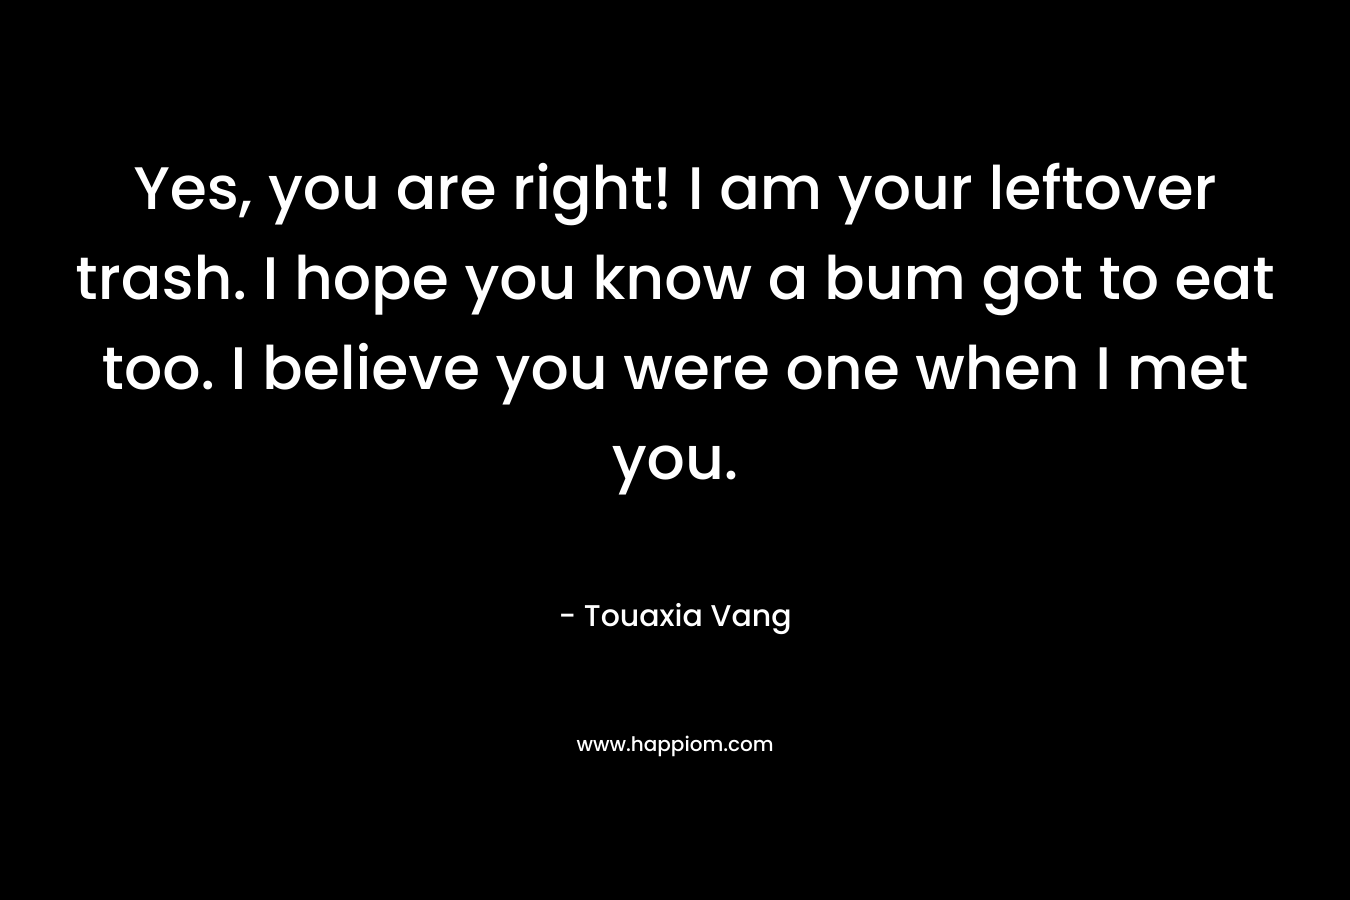 Yes, you are right! I am your leftover trash. I hope you know a bum got to eat too. I believe you were one when I met you. – Touaxia Vang